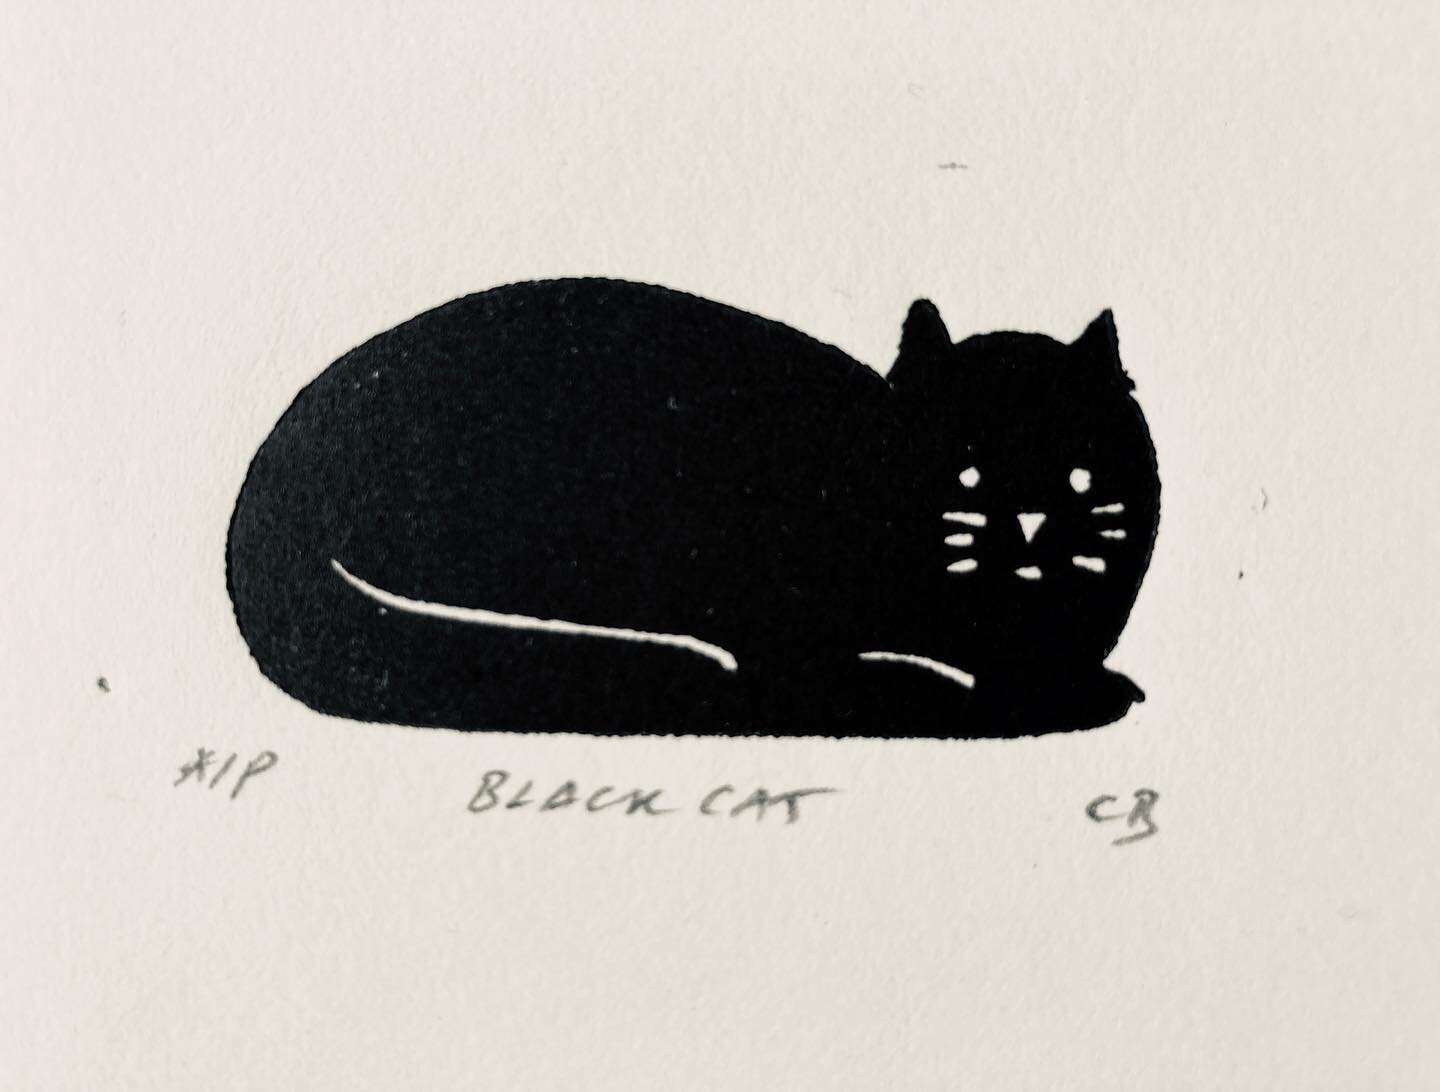 B L A C K  C A T 🖤 small Linocut by @christopherbrownlino . 🖤Image size: 2.5 x 5 Paper Size: 13.5 x 19.5 🖤Unframed Artists Proof 🖤Available 🖤 #blackcat #cat #blackcatsofinstagram #blackcatlove #catlinocut #christopherbrownlino #linocut #linocutp